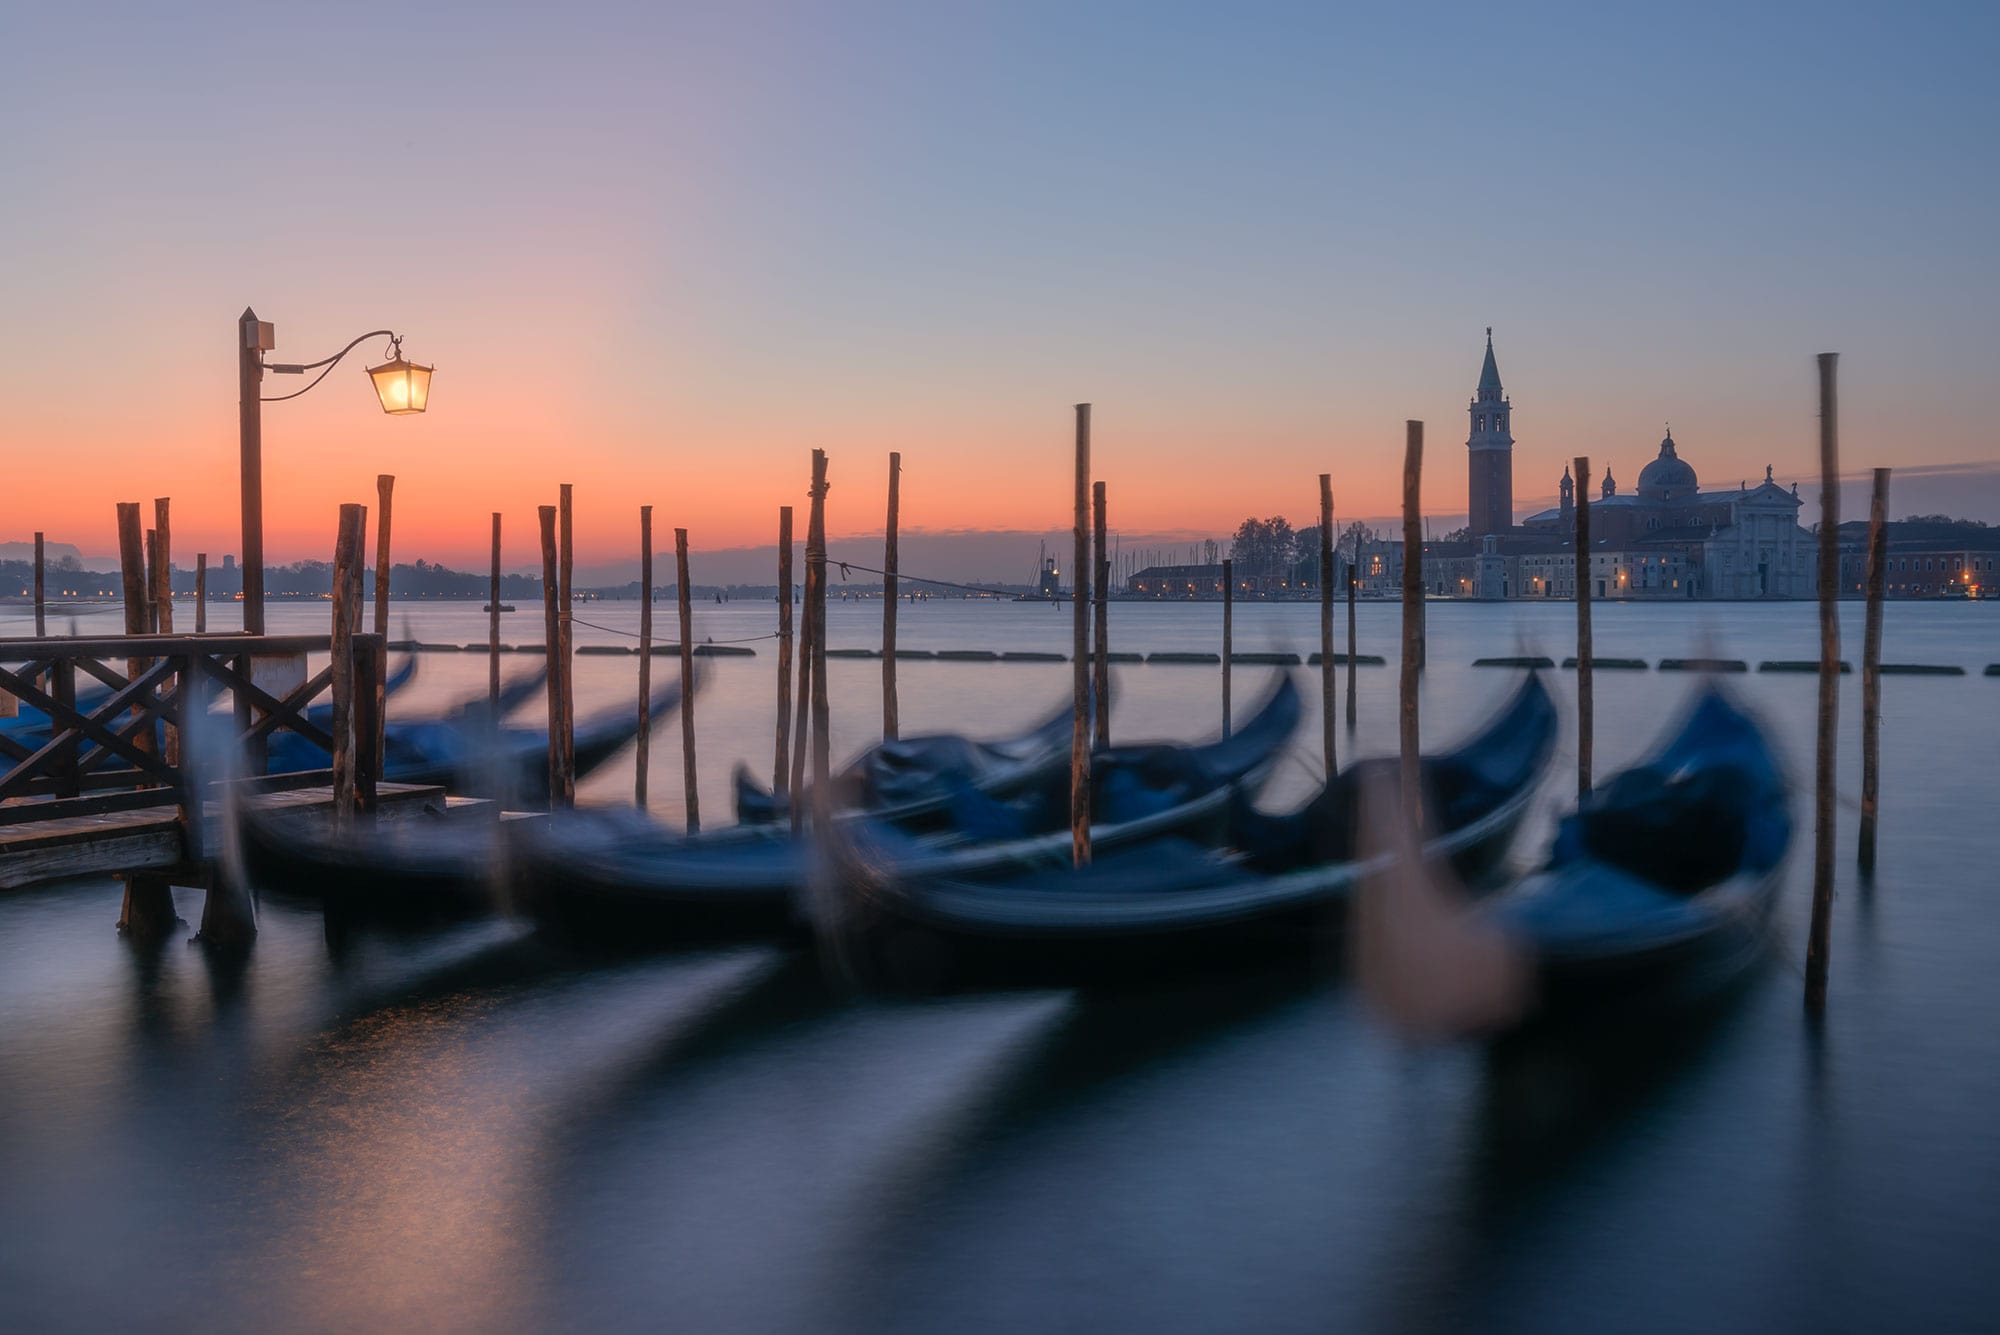 Landscape photography capturing a sunrise at Piazza San Marco in Venice, featuring a long exposure shot of Venetian gondolas gently swaying on the water.